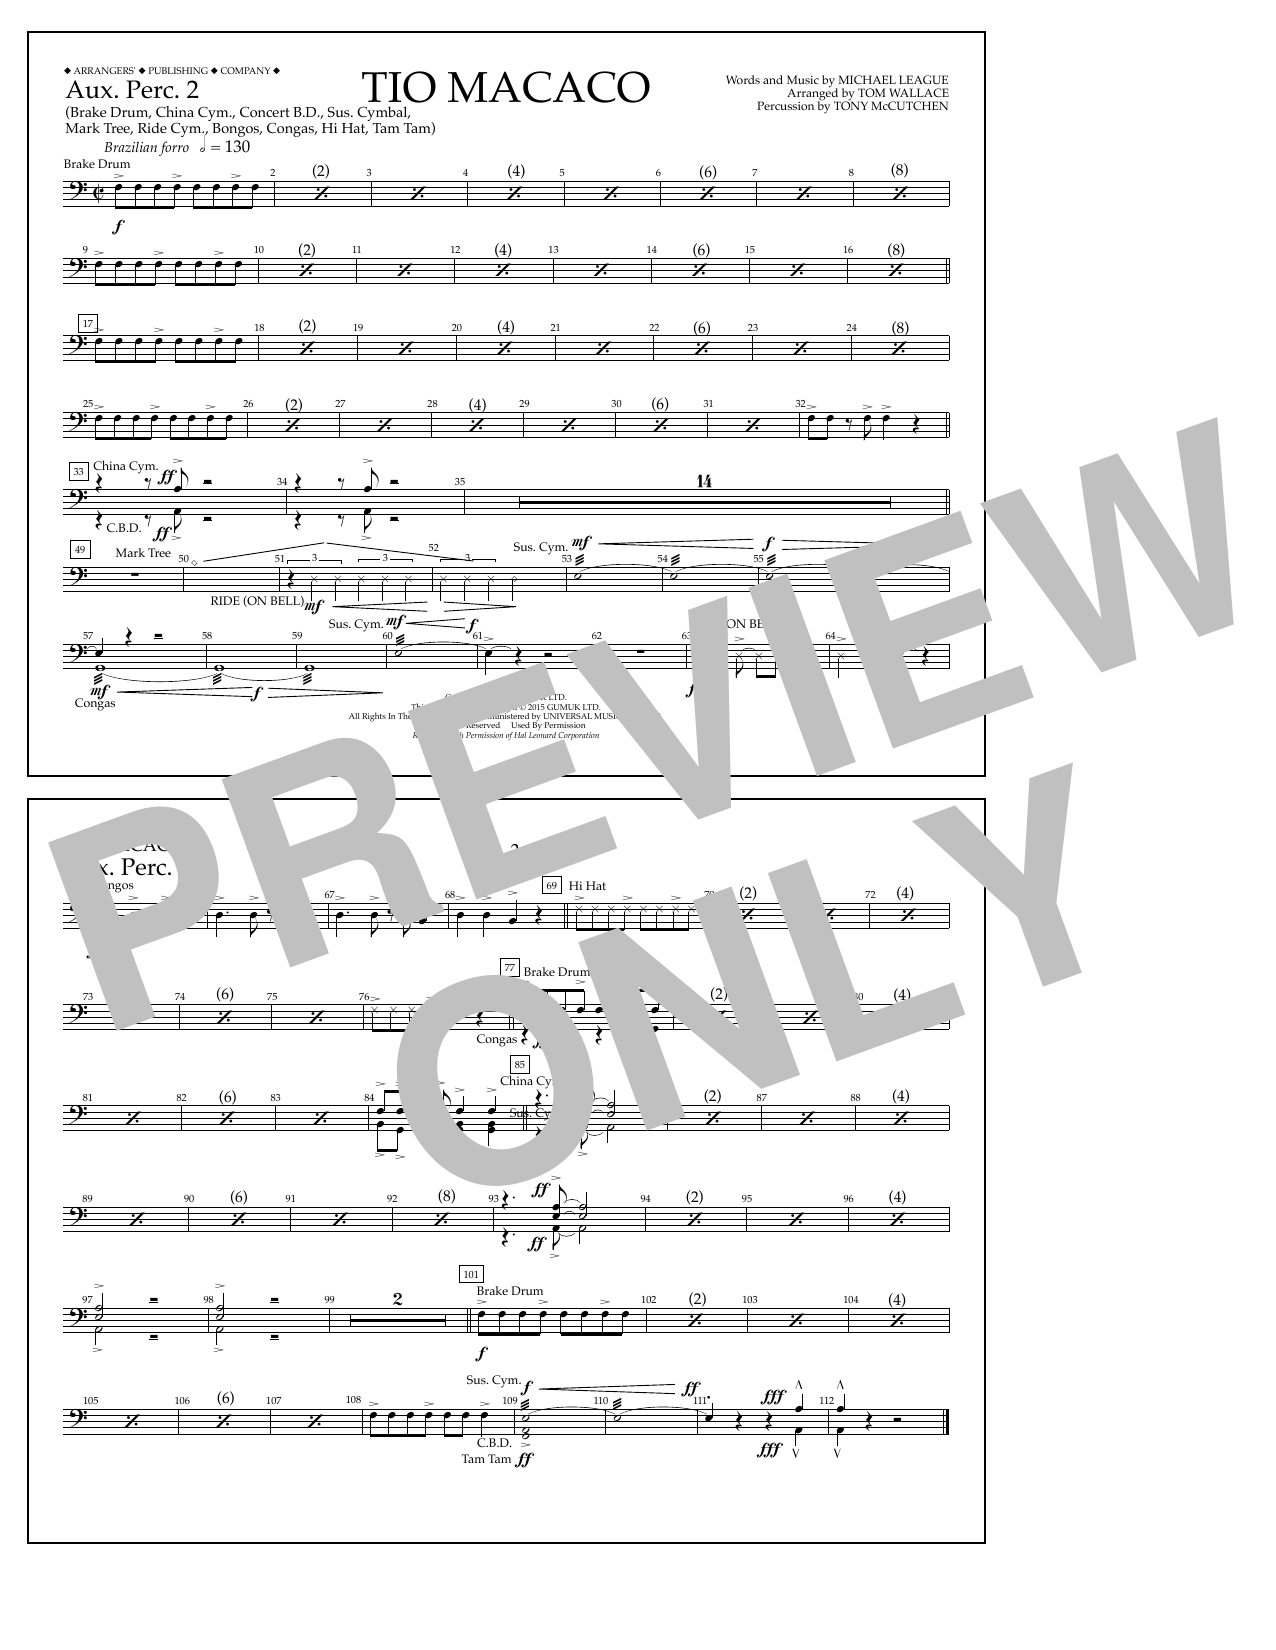 Download Tom Wallace Tio Macaco - Aux. Perc. 2 Sheet Music